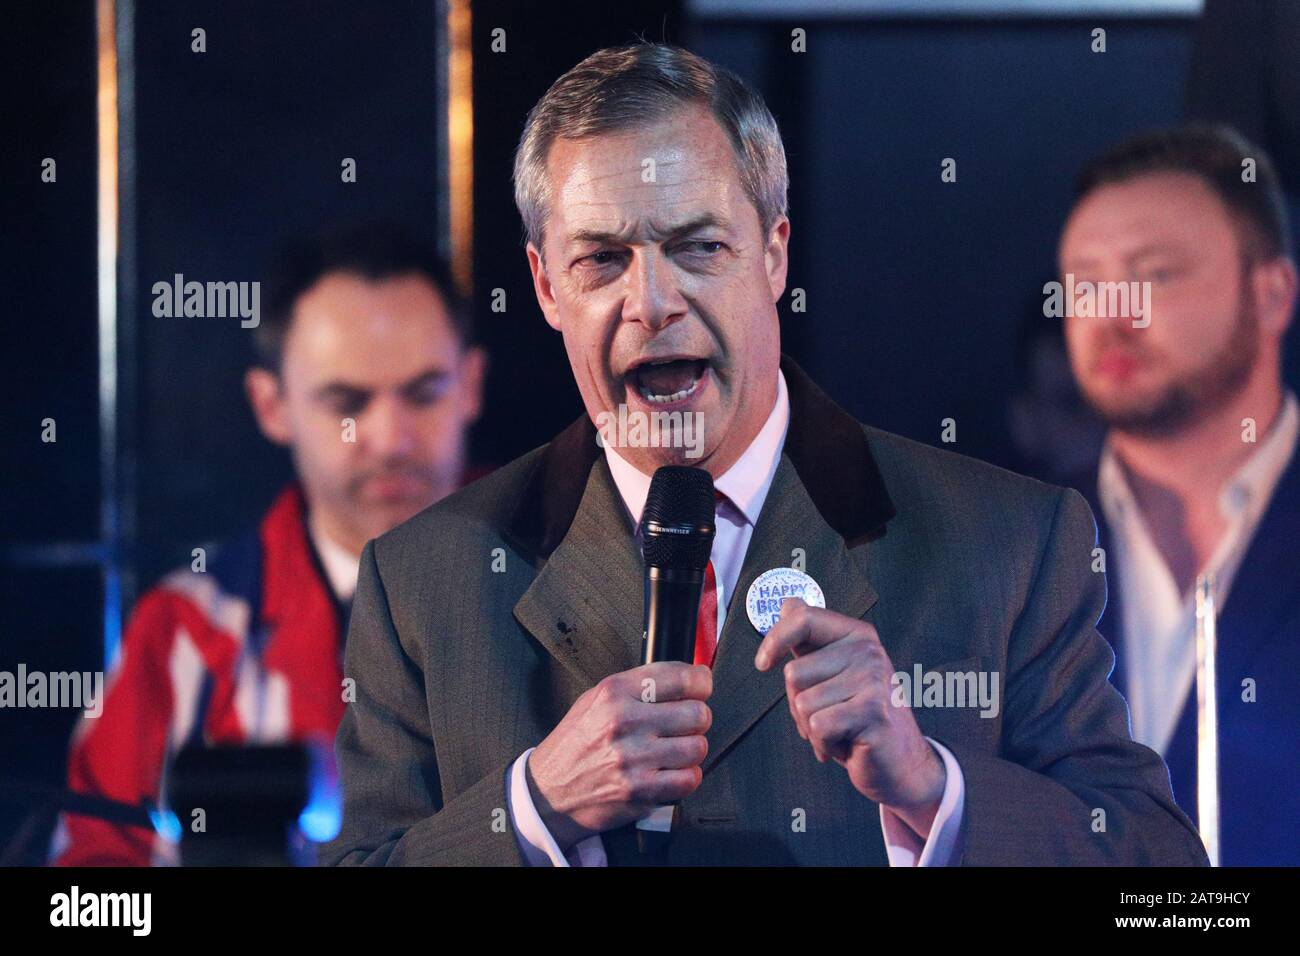 Nigel Farage speaks to pro-Brexit supporters in Parliament Square, London, as the UK prepares to leave the European Union, ending 47 years of close and sometimes uncomfortable ties to Brussels. Stock Photo